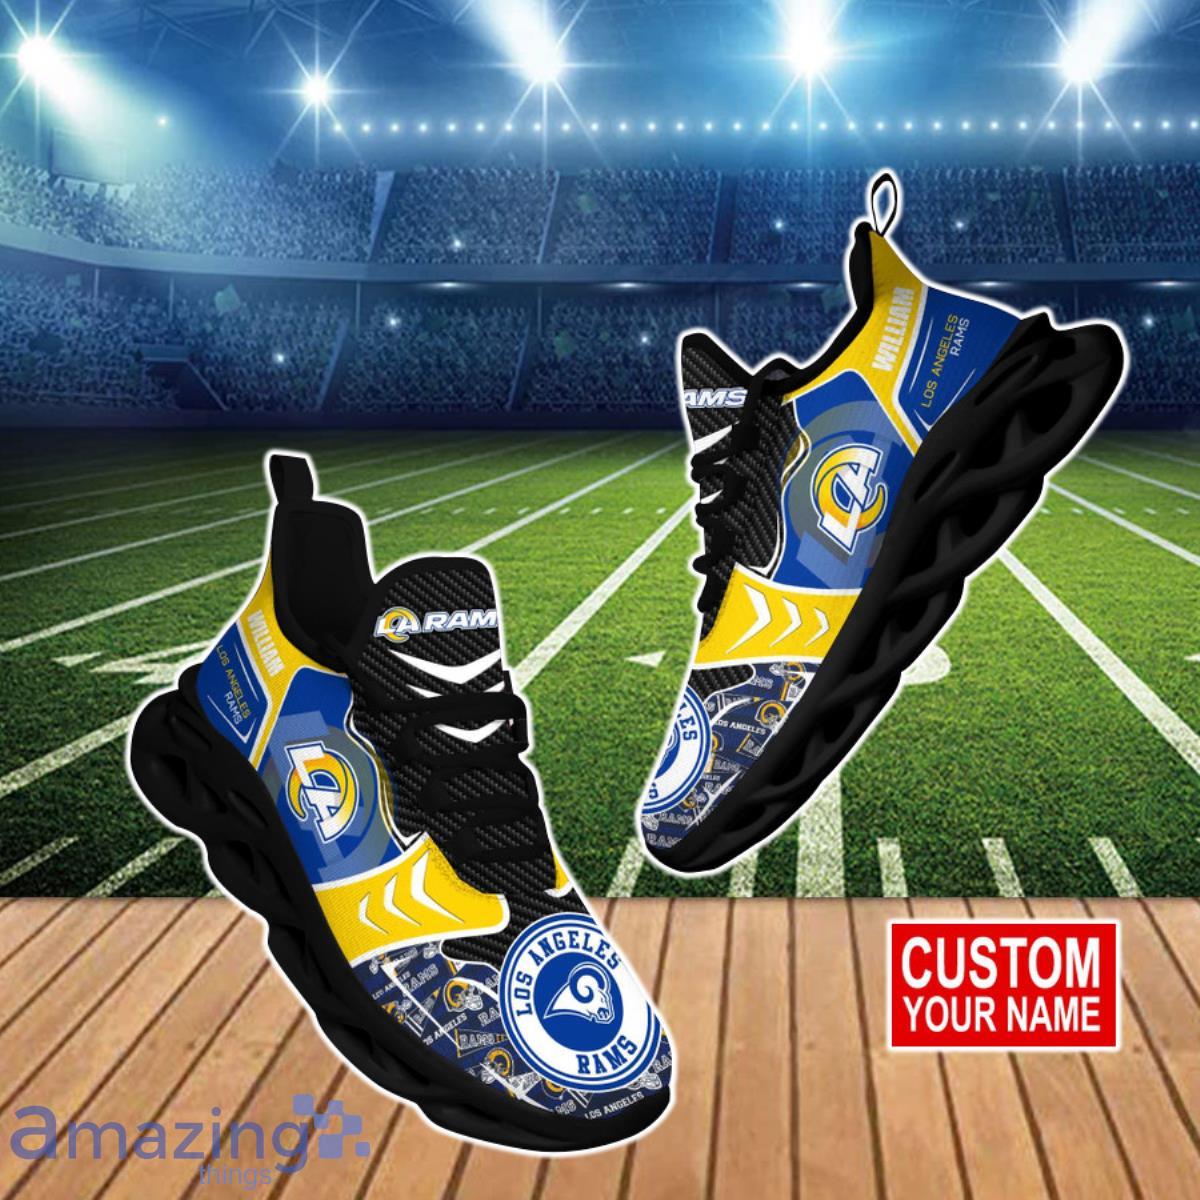 Los Angeles Rams NFL Clunky Max Soul Shoes Custom Name Unique Gift For True Fans Product Photo 1